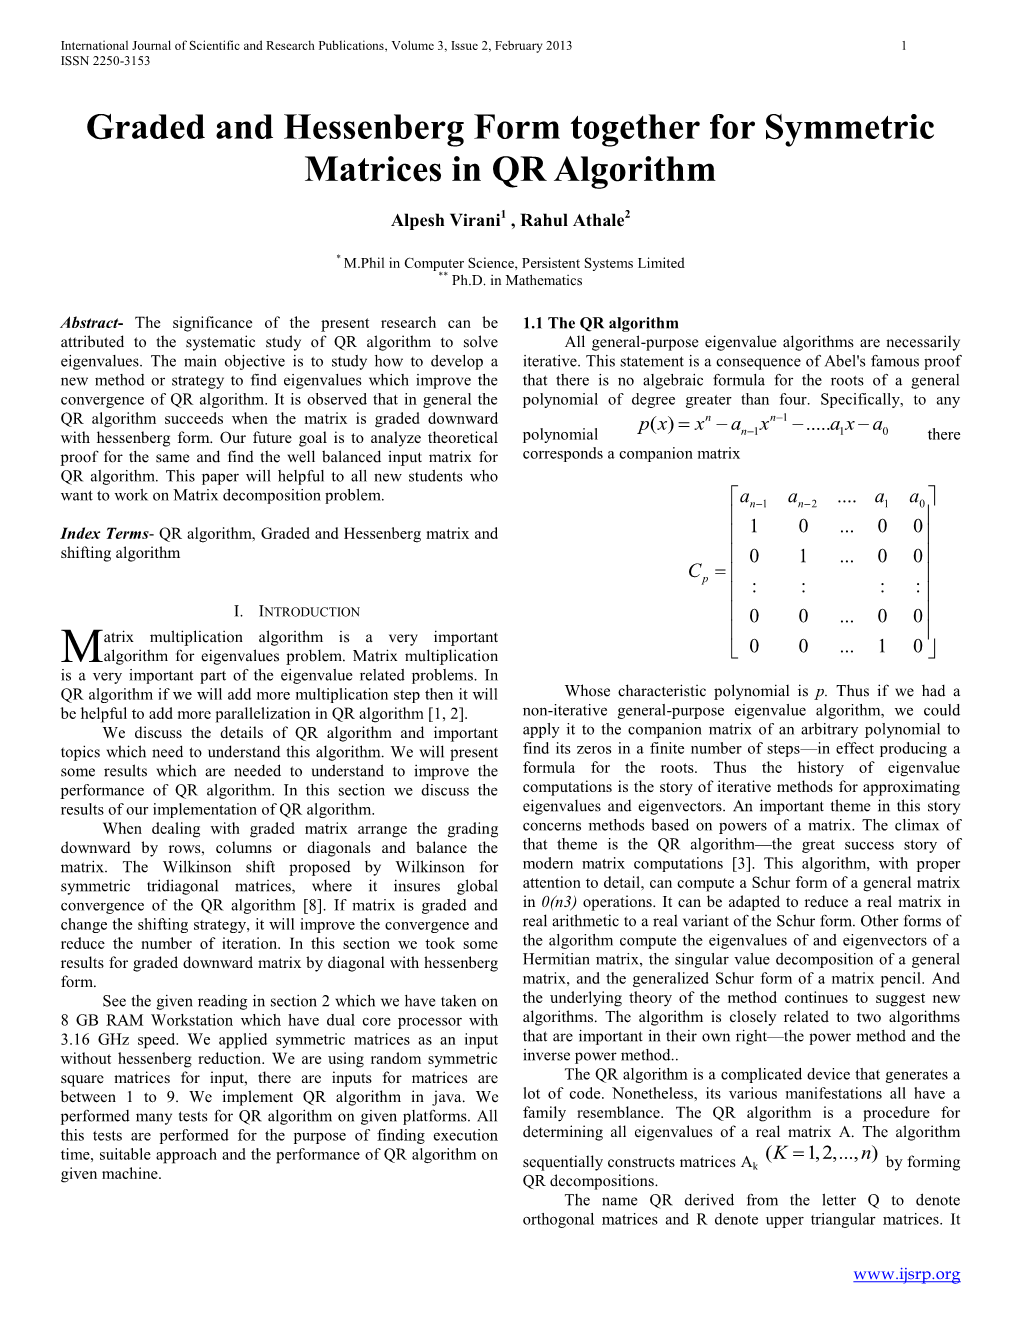 Graded and Hessenberg Form Together for Symmetric Matrices in QR Algorithm